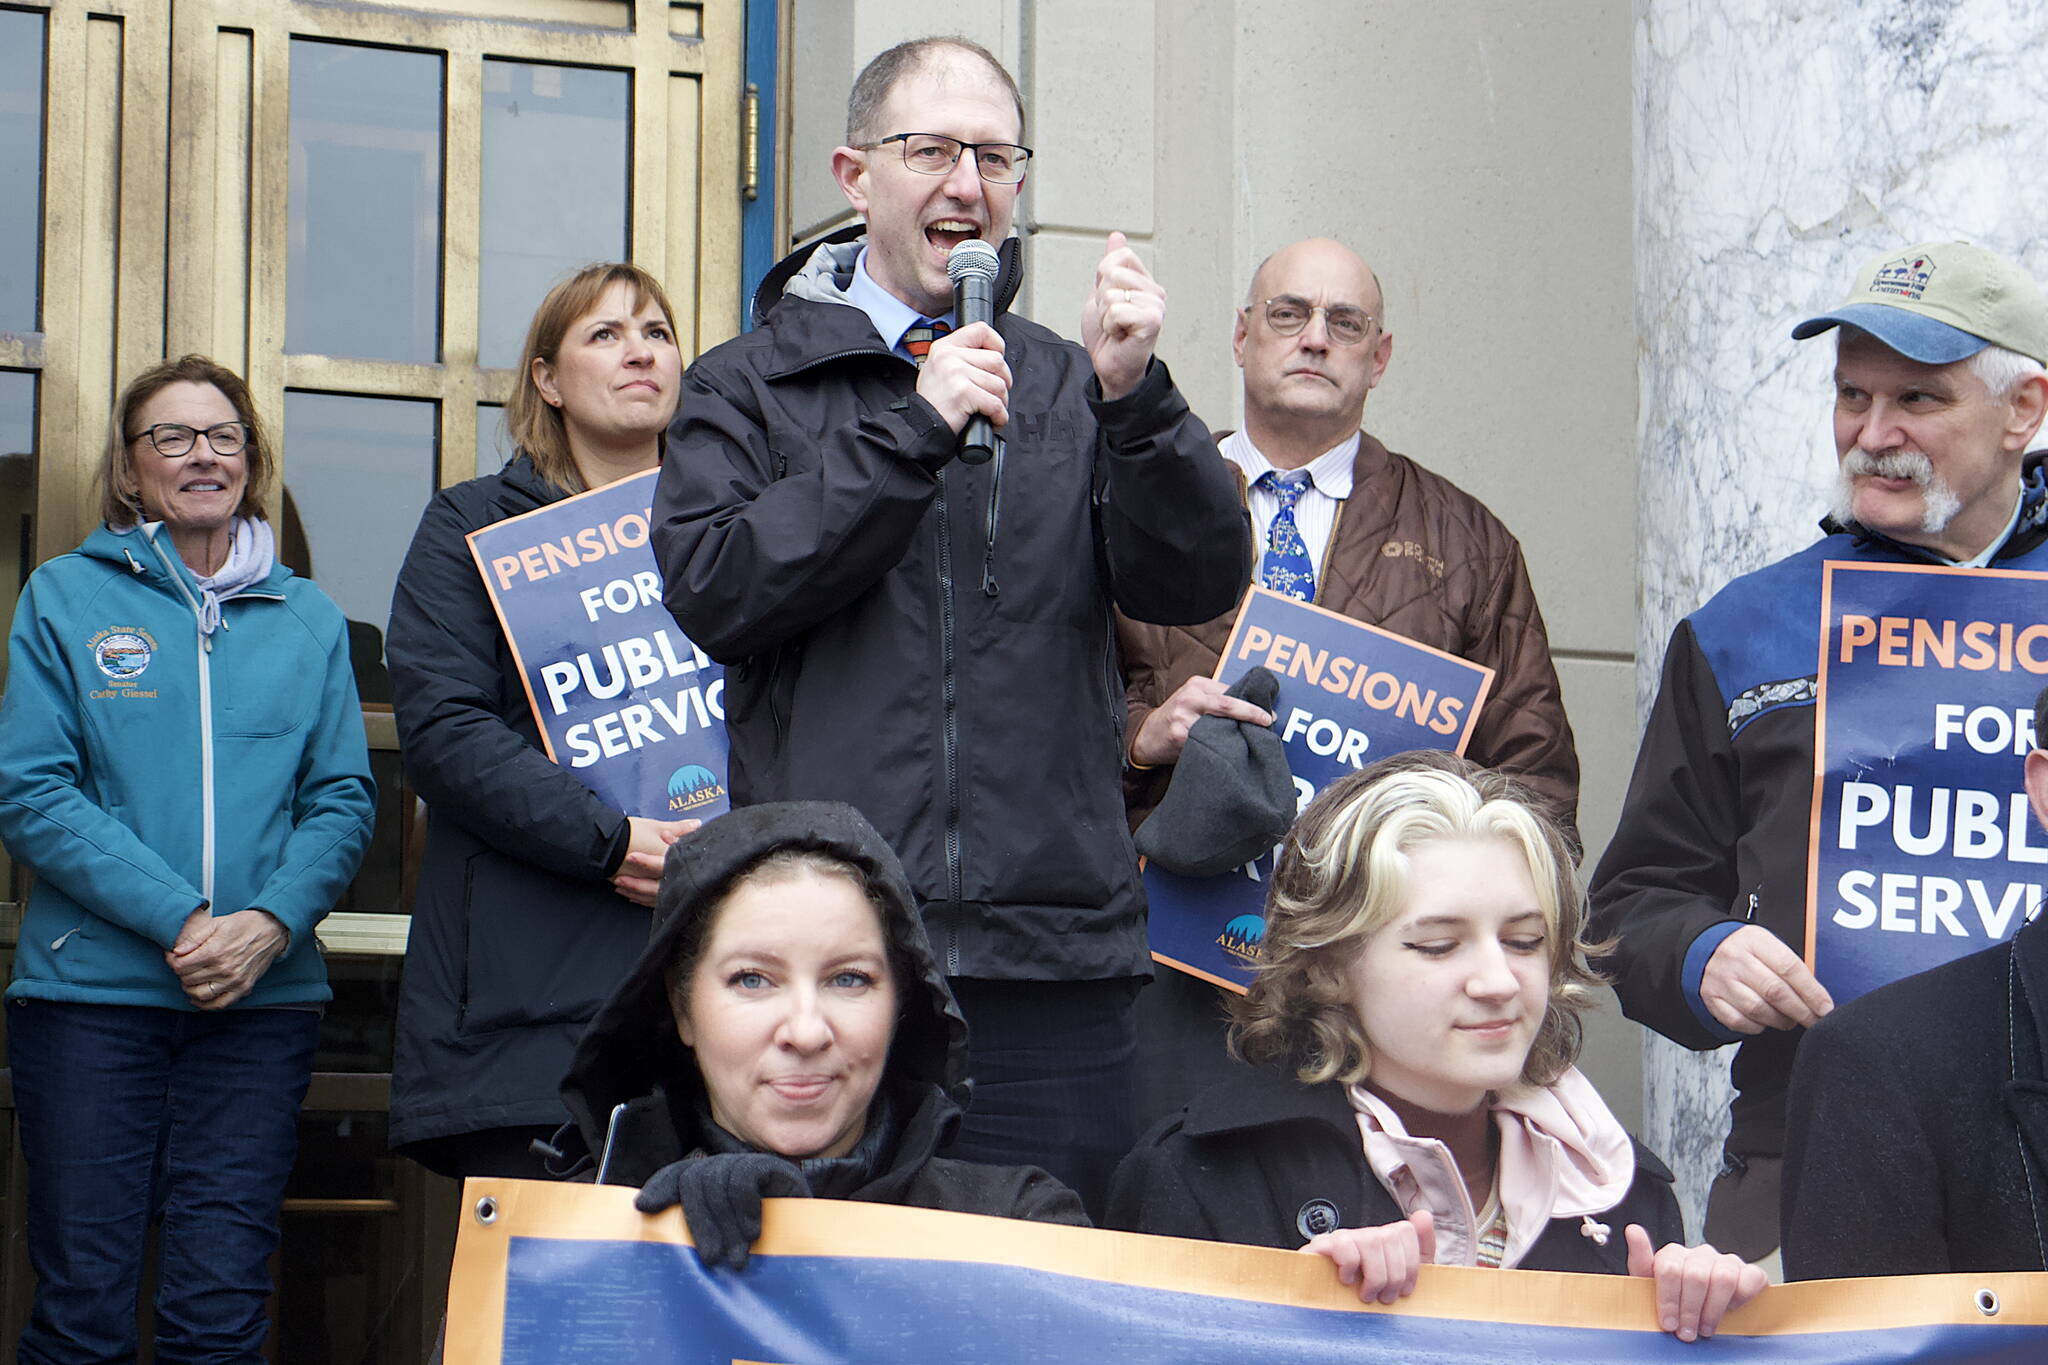 State Sen. Jesse Kiehl, D-Juneau, addresses a crowd during a May 7 rally at the Alaska State Capitol calling for public employee pension reform. Kiehl received the second-highest score in an annual online survey ranking legislators released Friday. (Mark Sabbatini / Juneau Empire File)